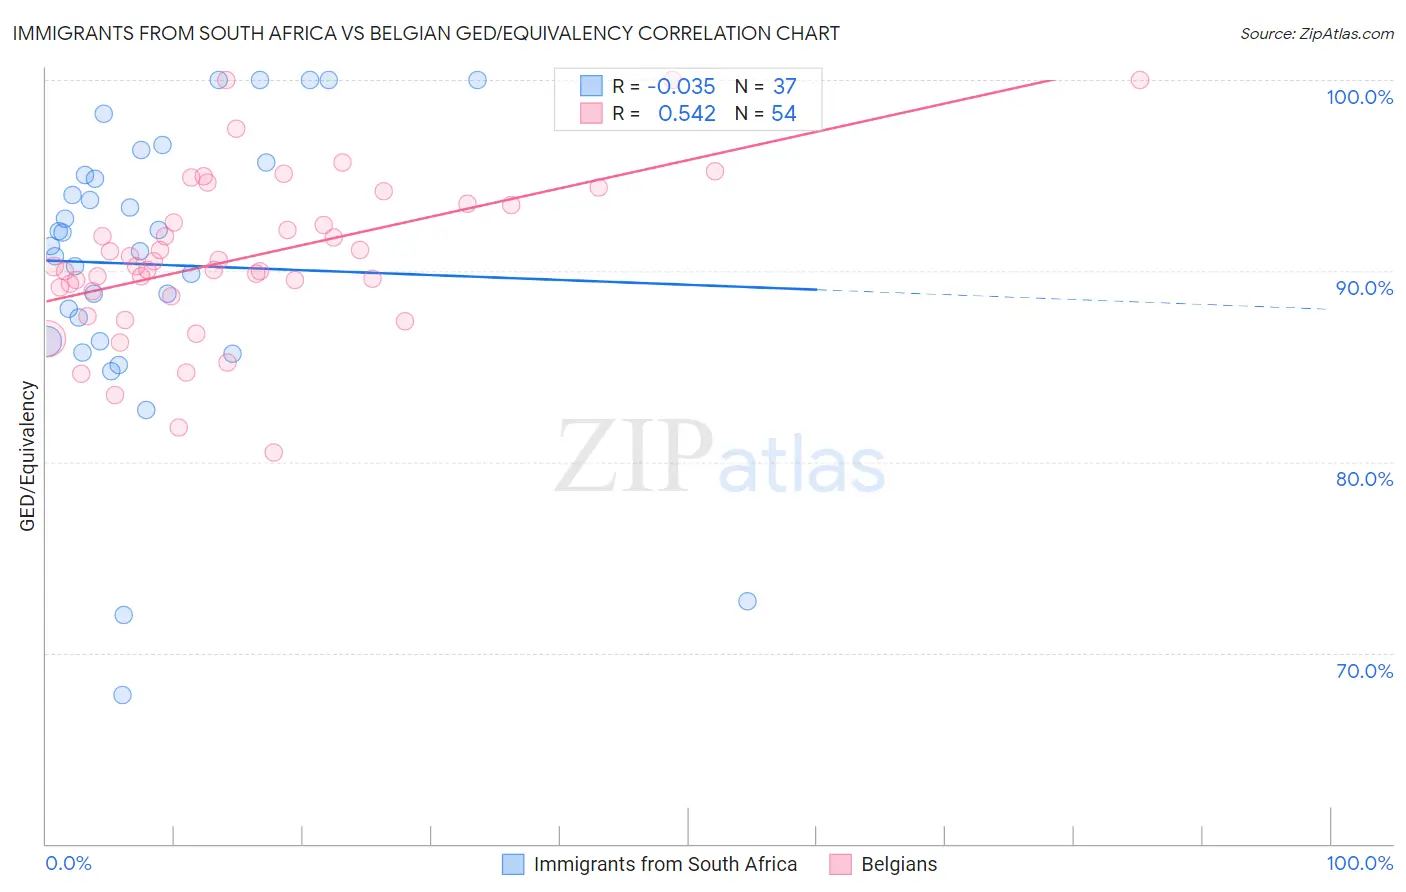 Immigrants from South Africa vs Belgian GED/Equivalency